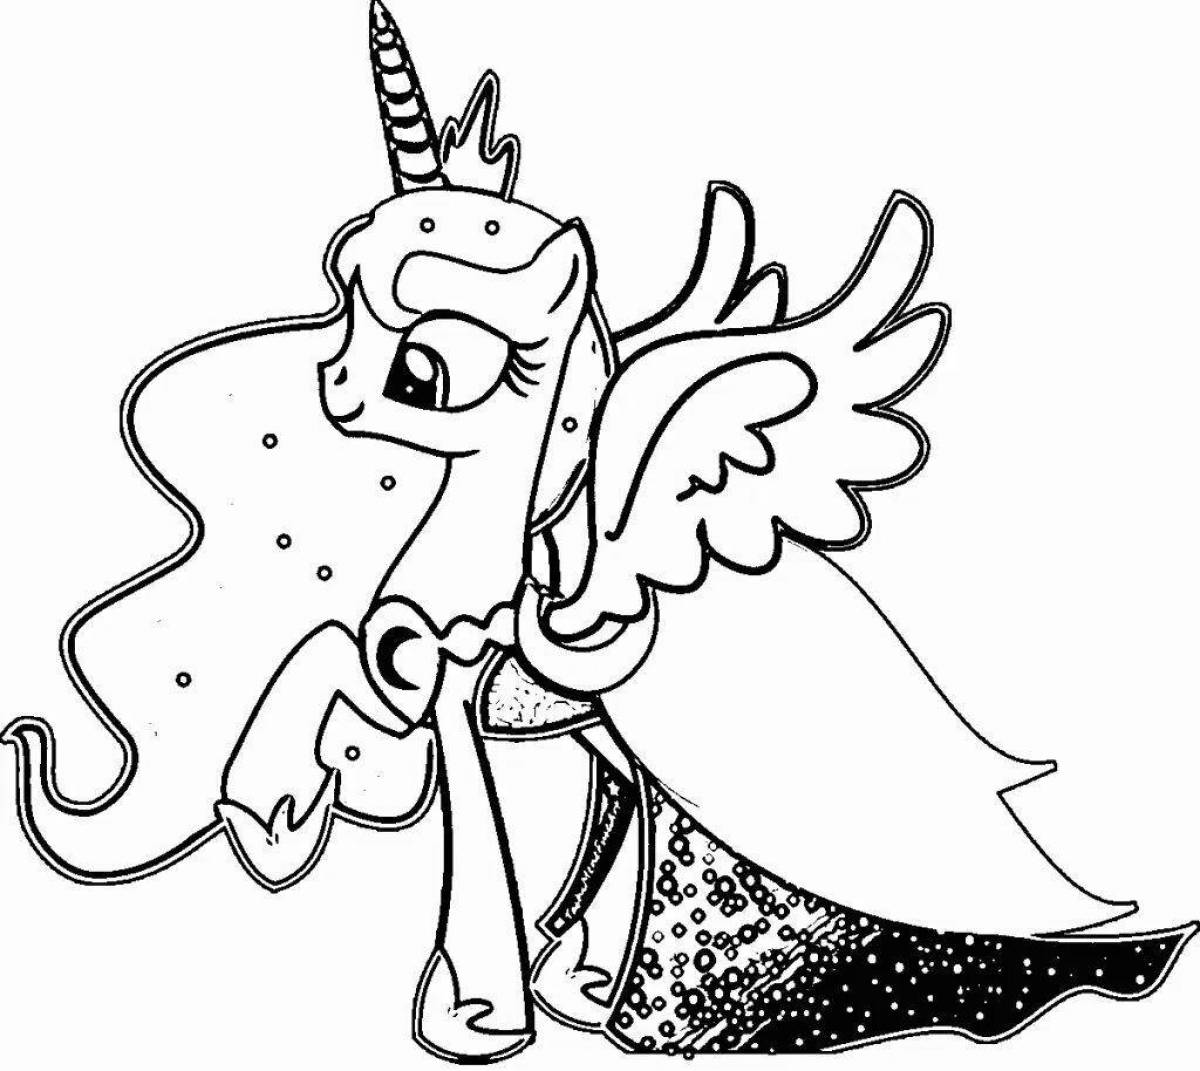 Exalted coloring page celestia and luna